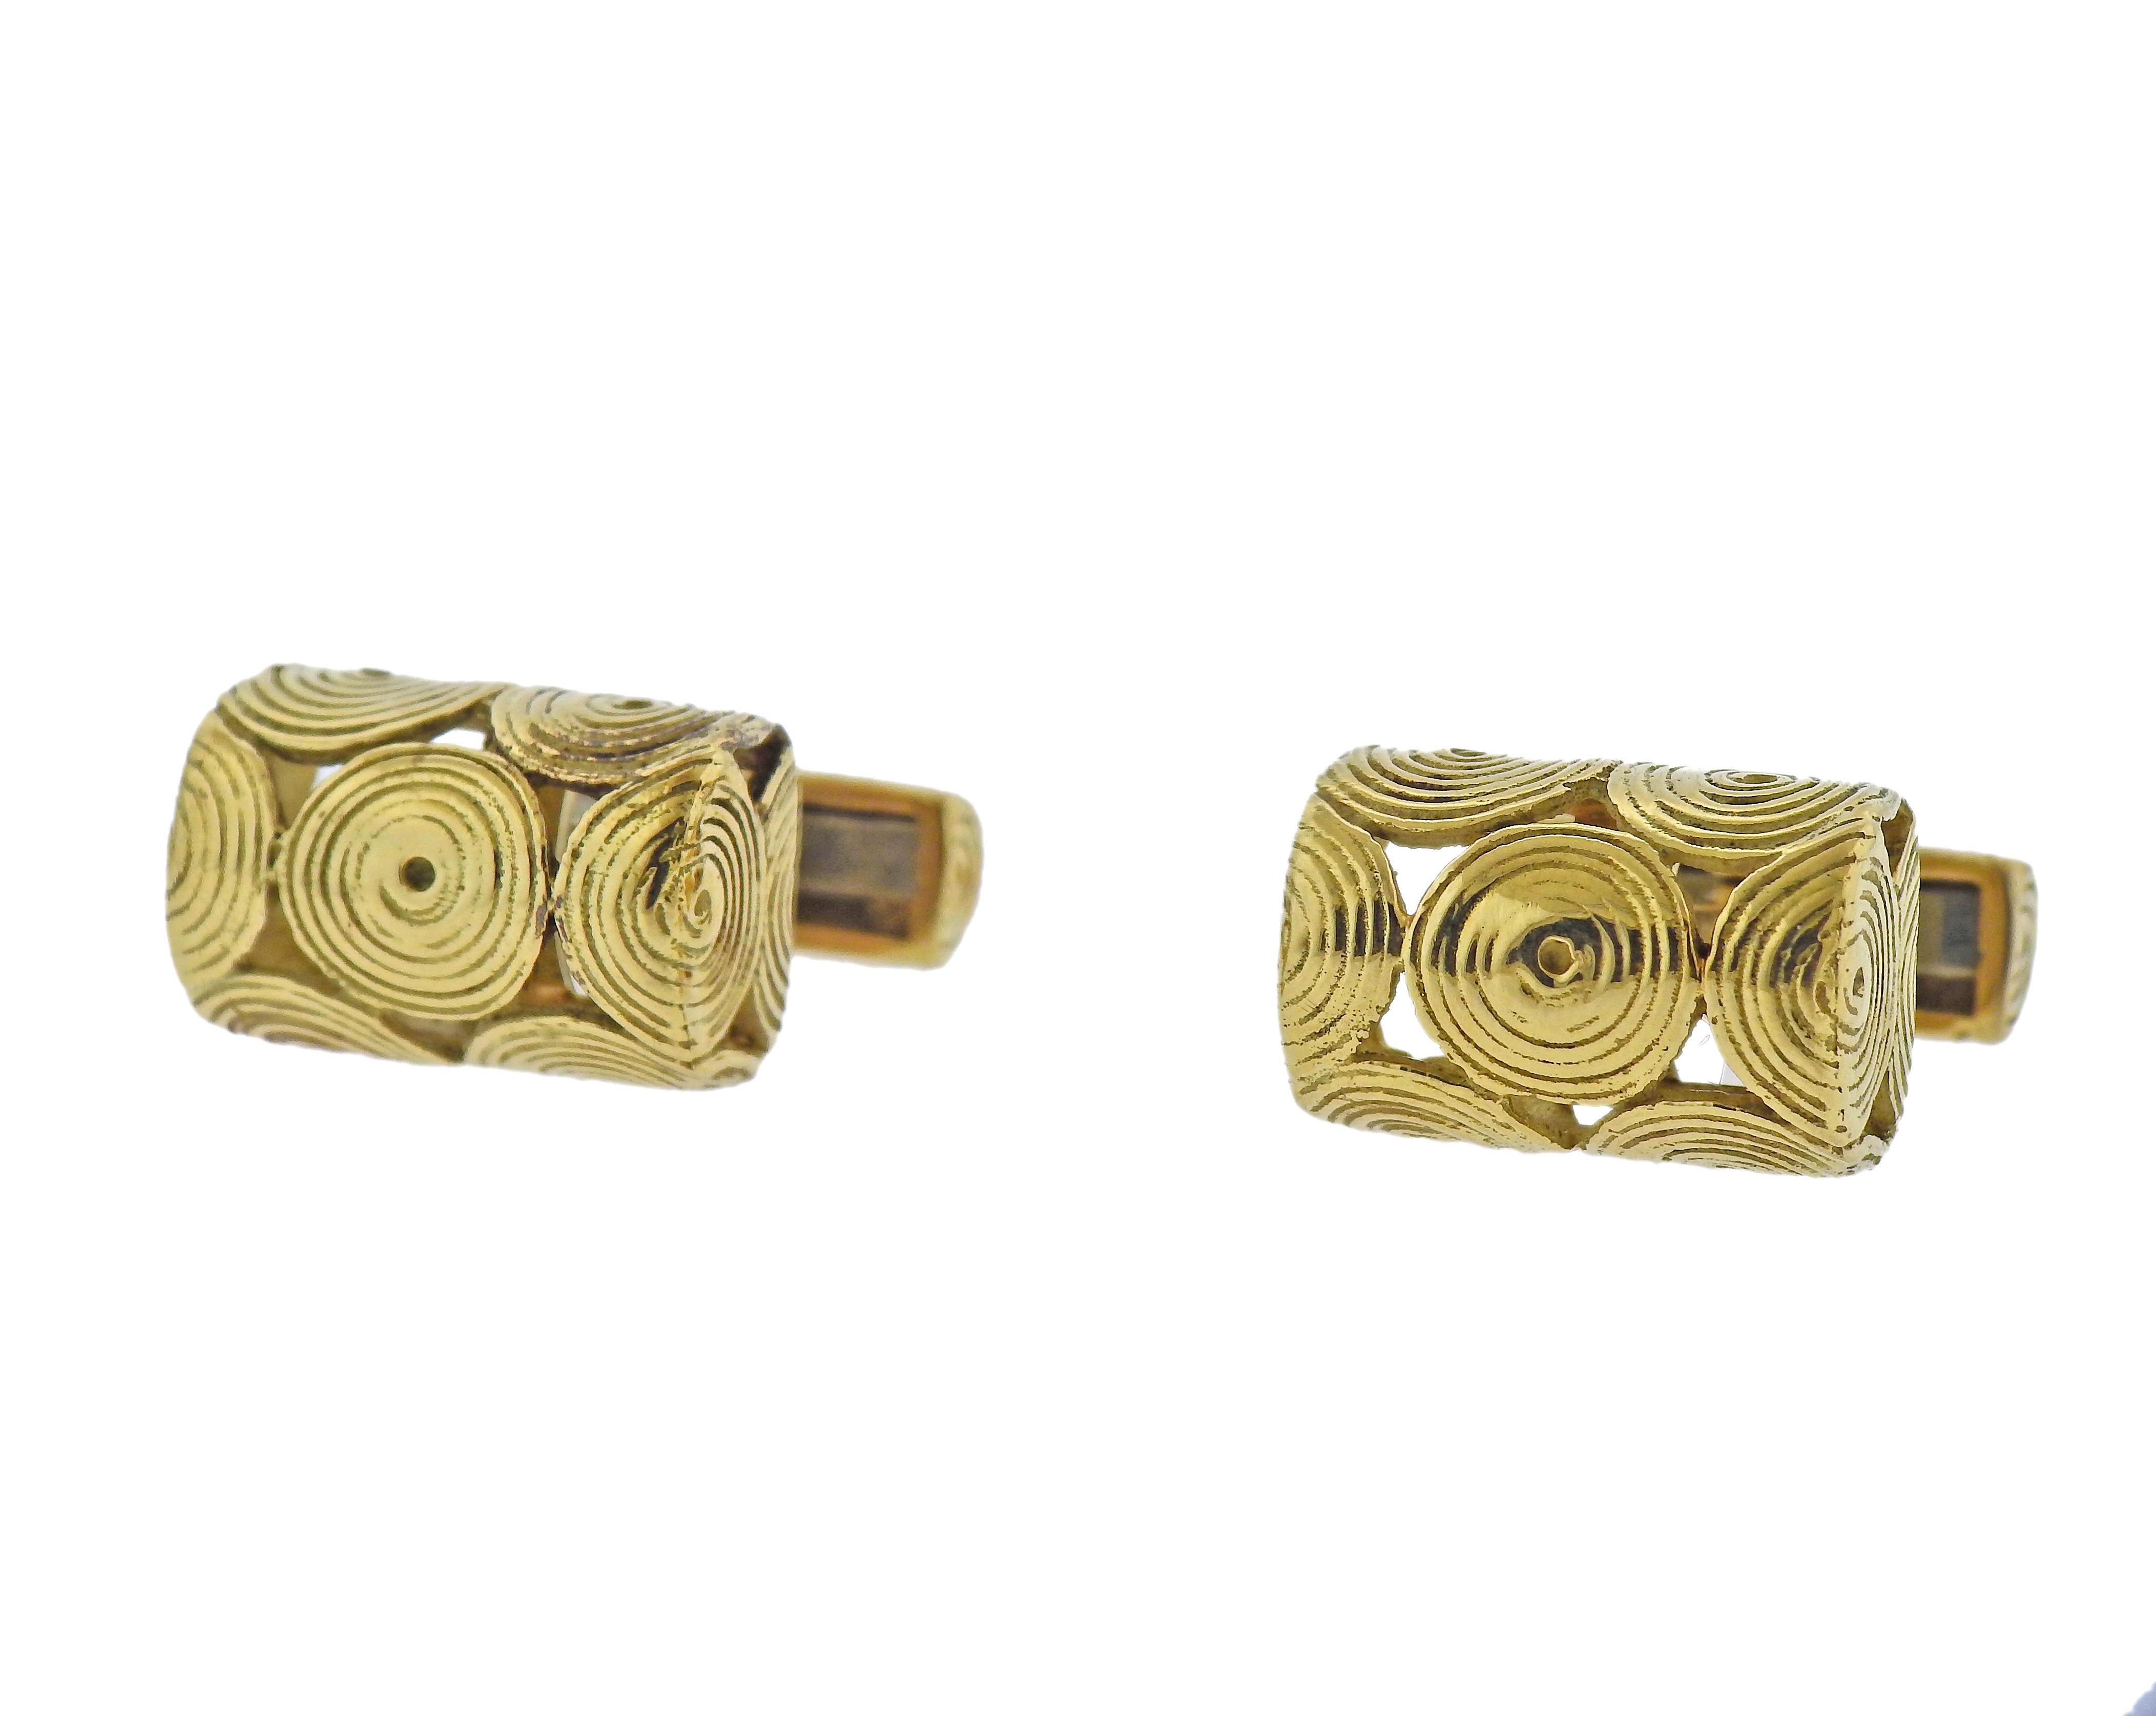 Pair of 18k gold swirl motif cufflinks by Tiffany & Co. Top measures 19mm x 13mm. Marked: Tiffany, 18k. Weight - 24.6 grams. 